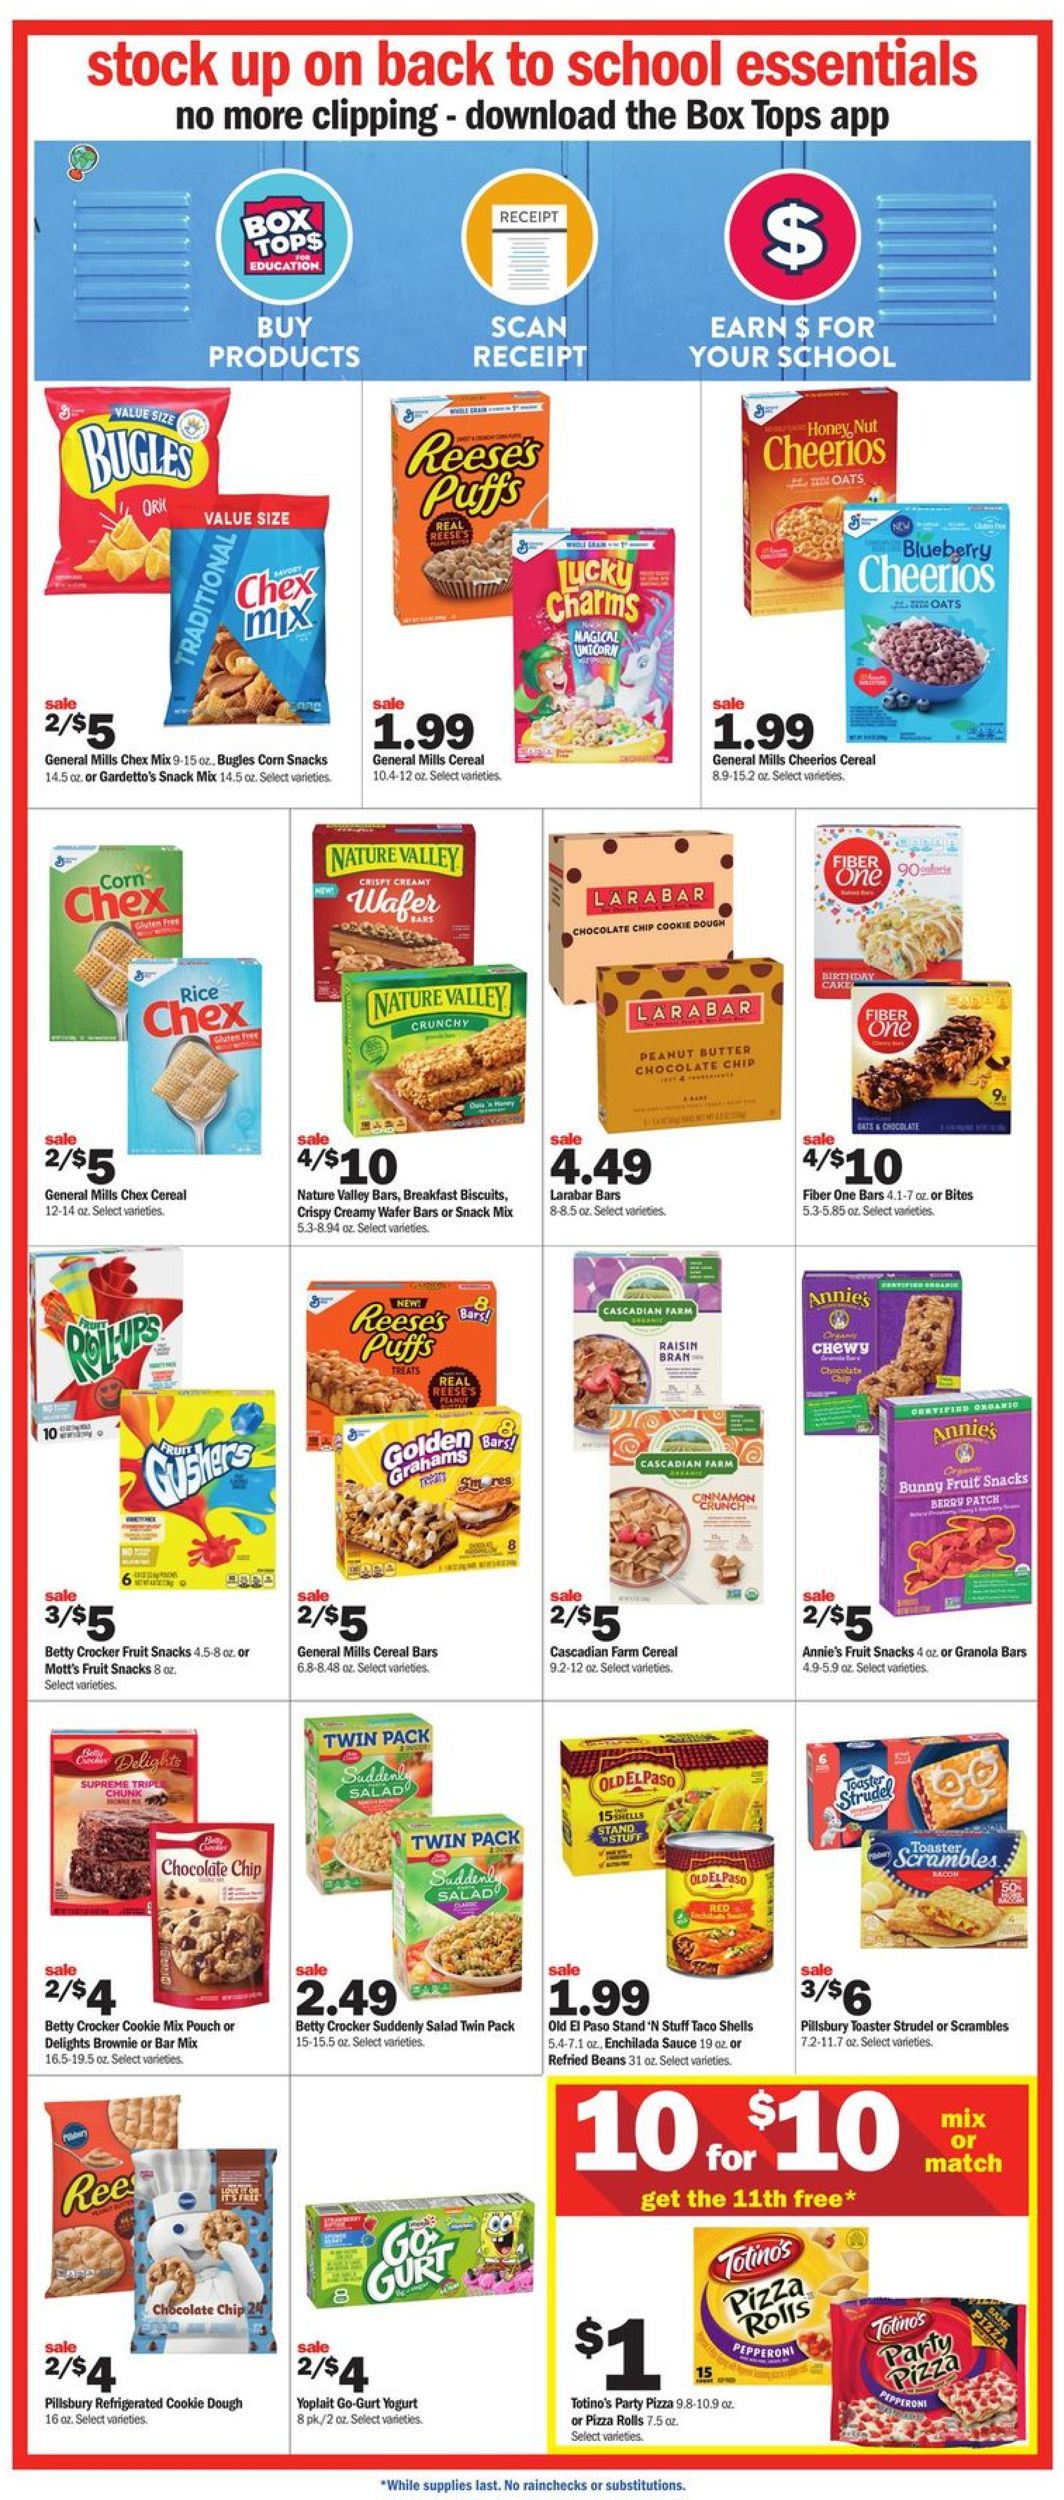 Meijer Current weekly ad 08/11 08/17/2019 [6]